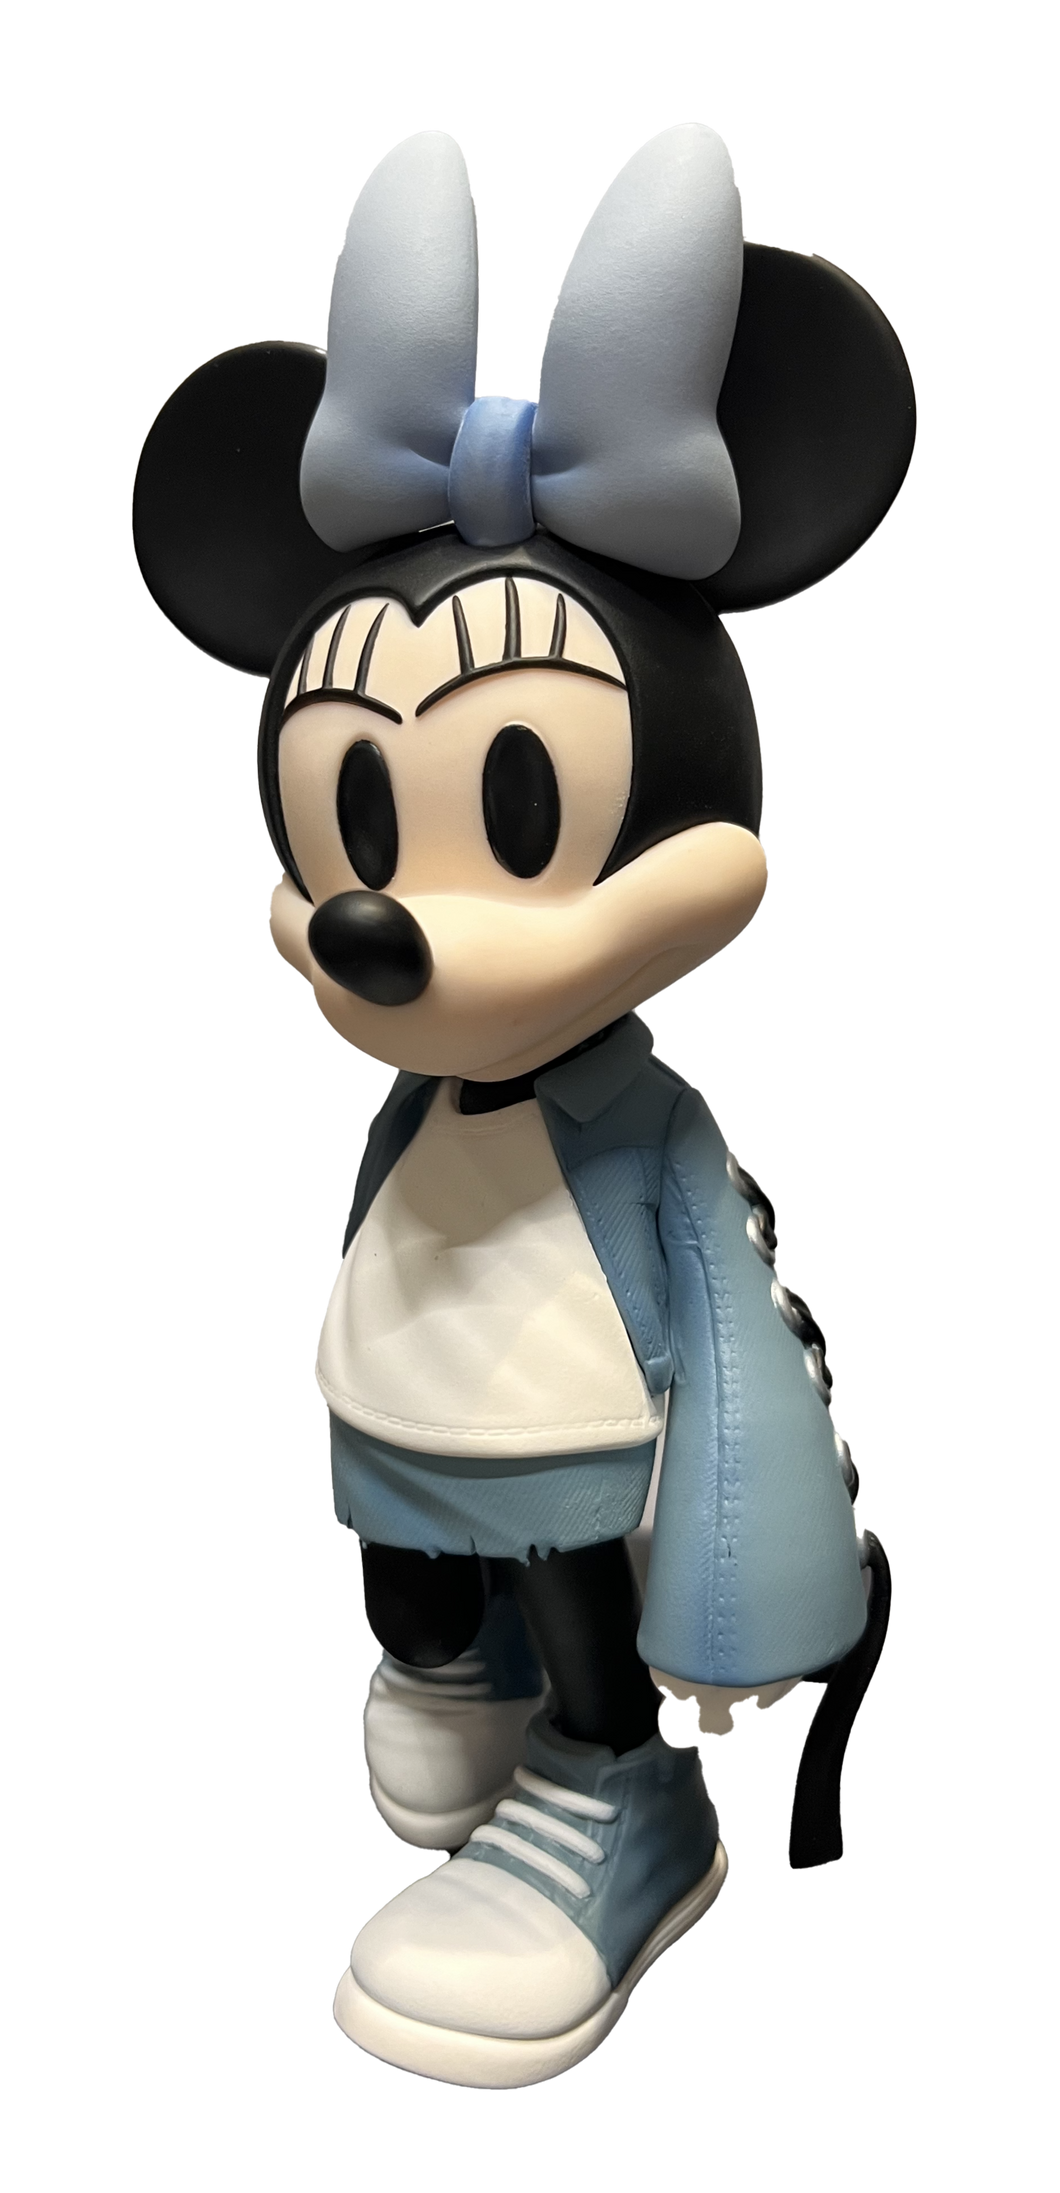 Minnie Mouse with Jeans Figure